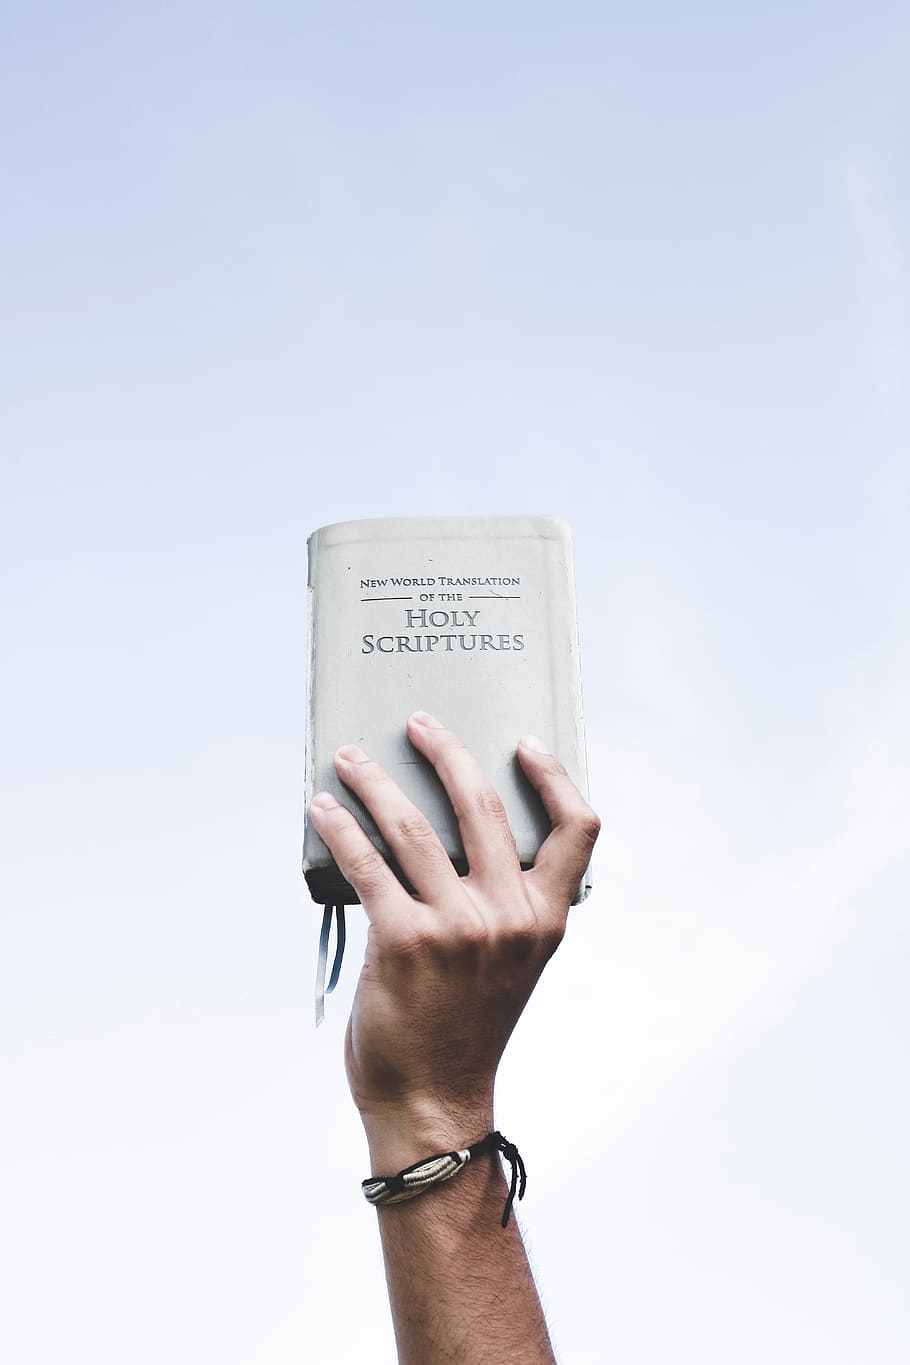 holy, book, bible, scriptures, reading, hand, human hand, human body part, one person, text